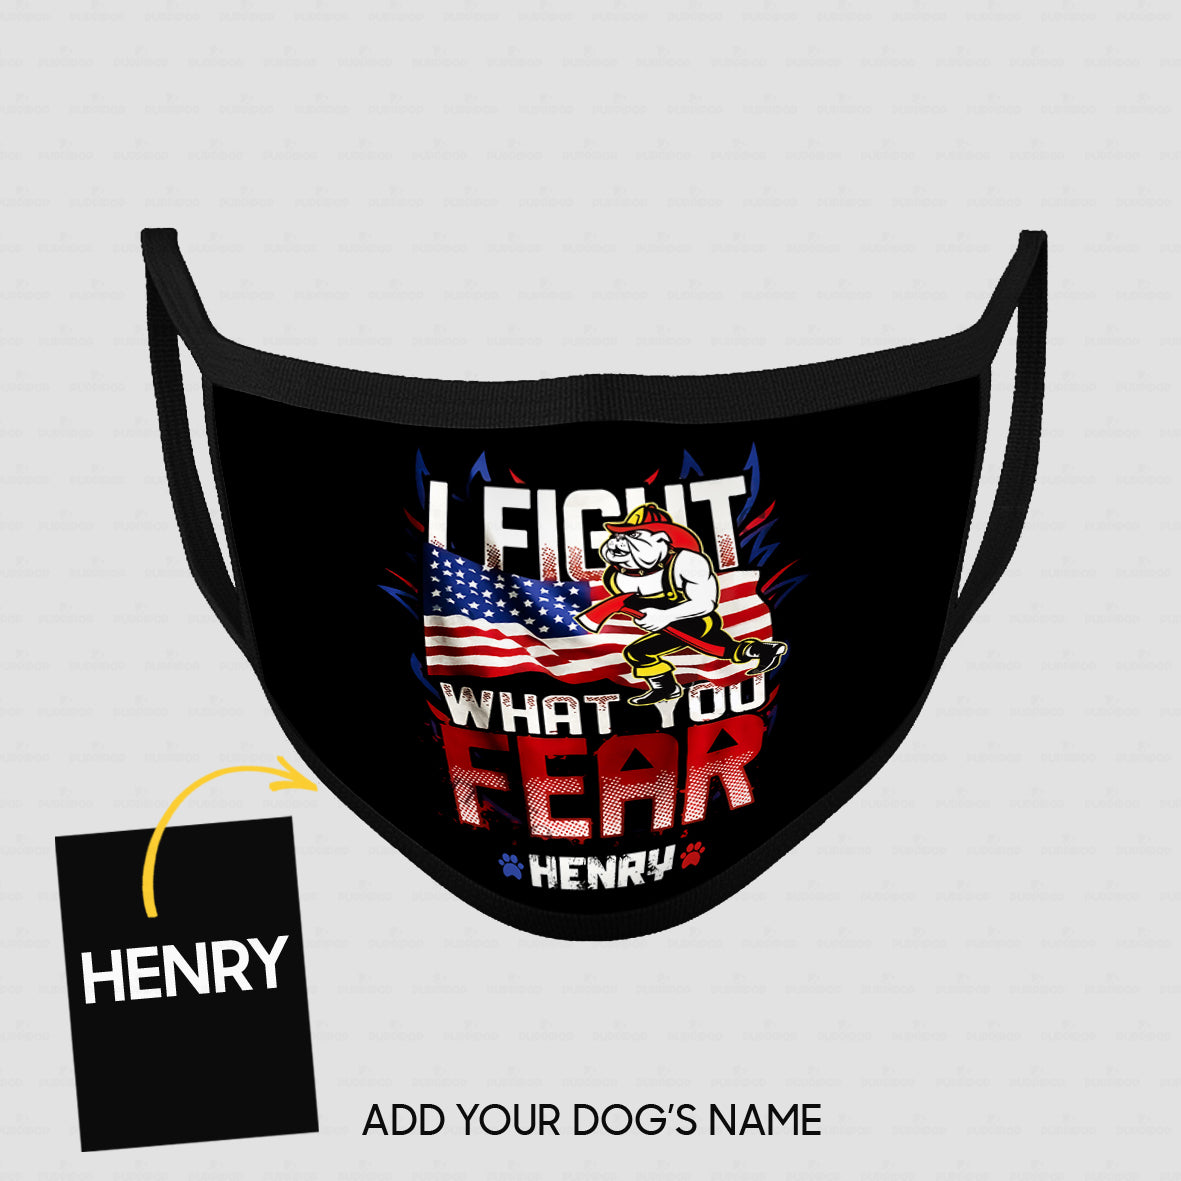 Personalized Dog Gift Idea - I Hold A Hammer And Fight What You Fear For Dog Lovers - Cloth Mask